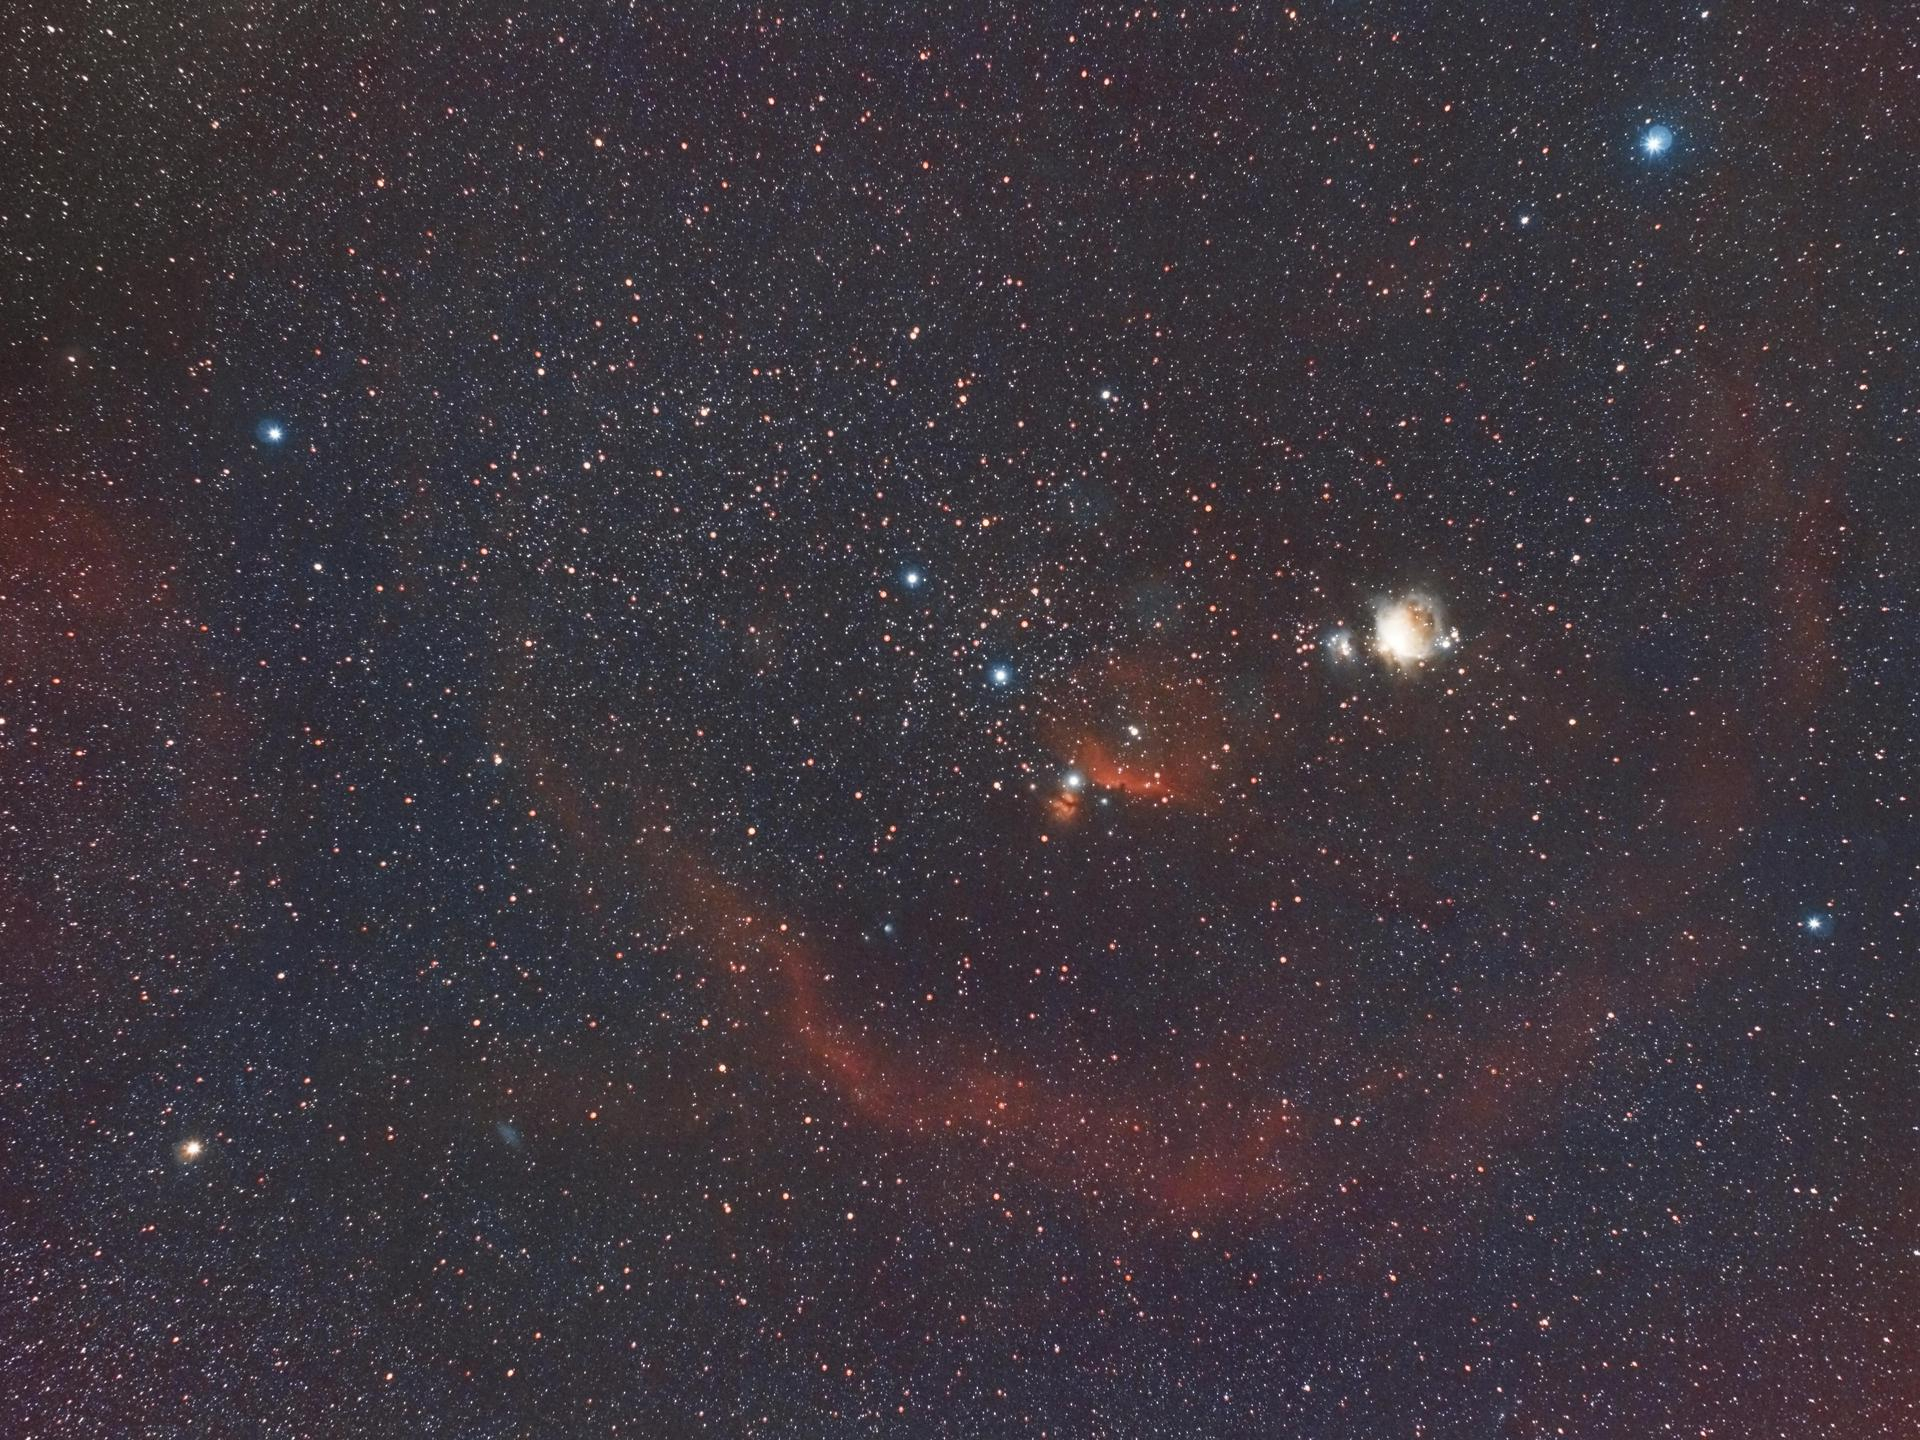 1920x1440 Orion constellation from Bortle 9